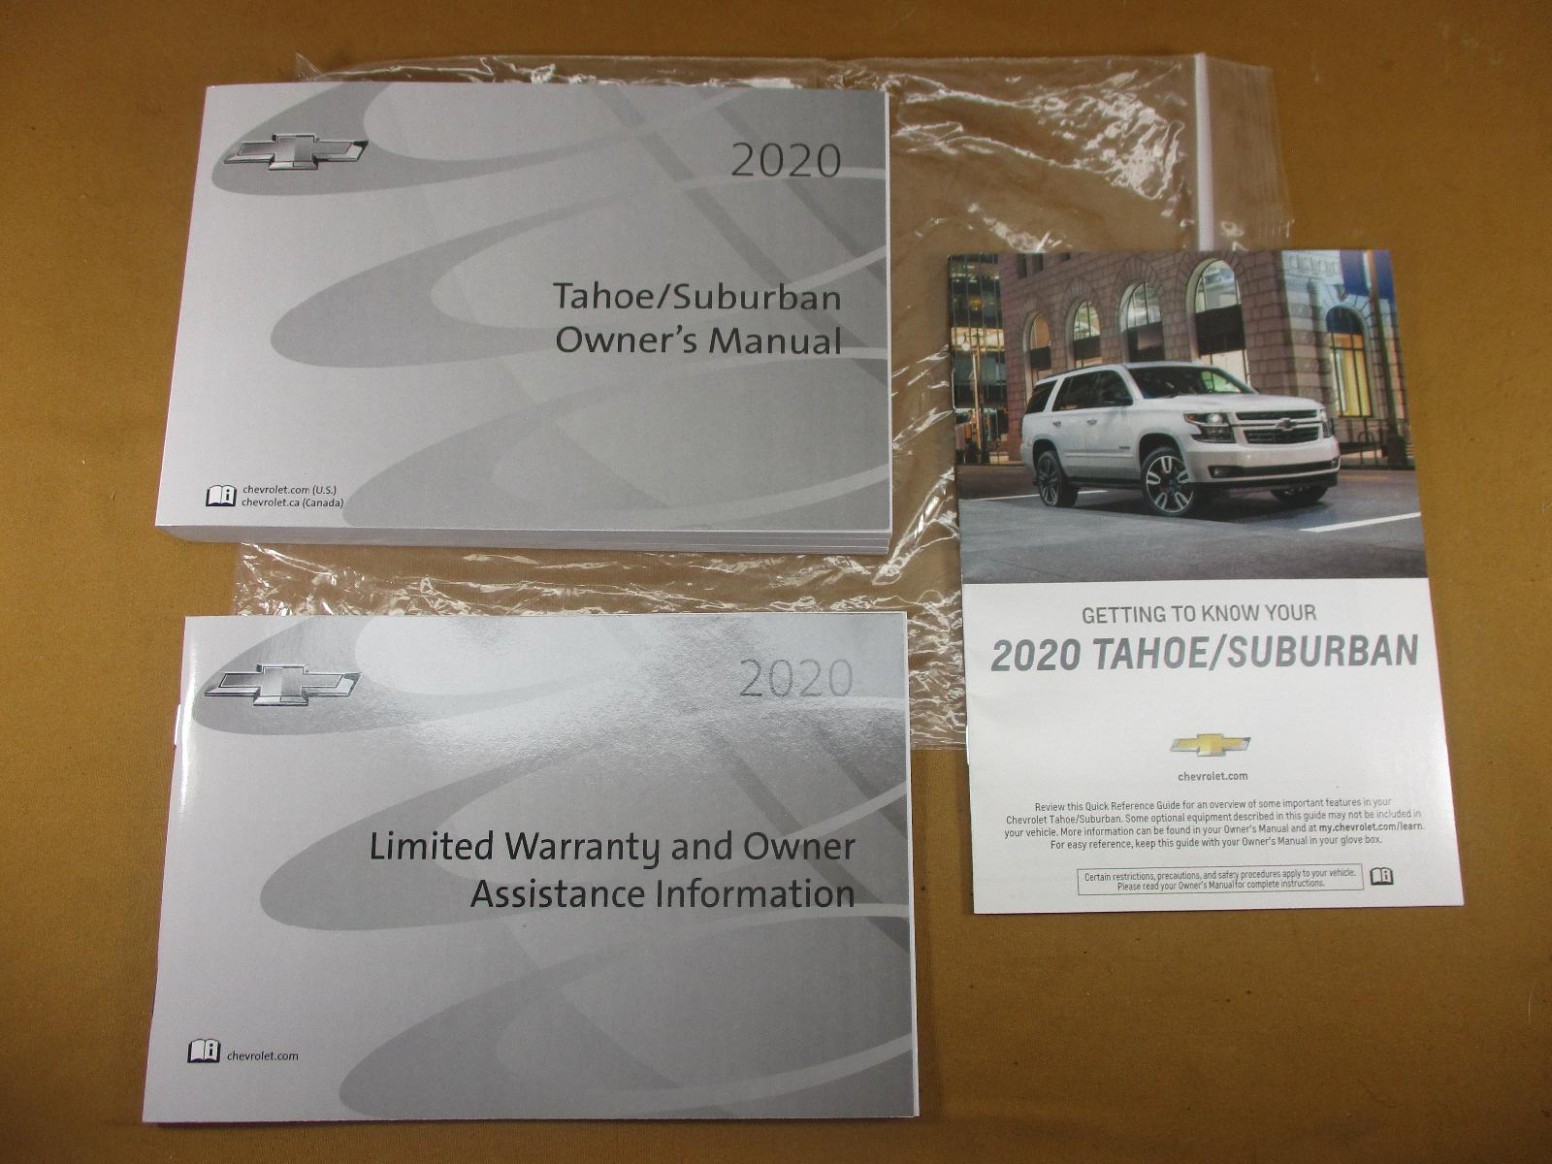 5 chevy chevrolet tahoe suburban owner s manual warranty 2020 chevrolet owners manual